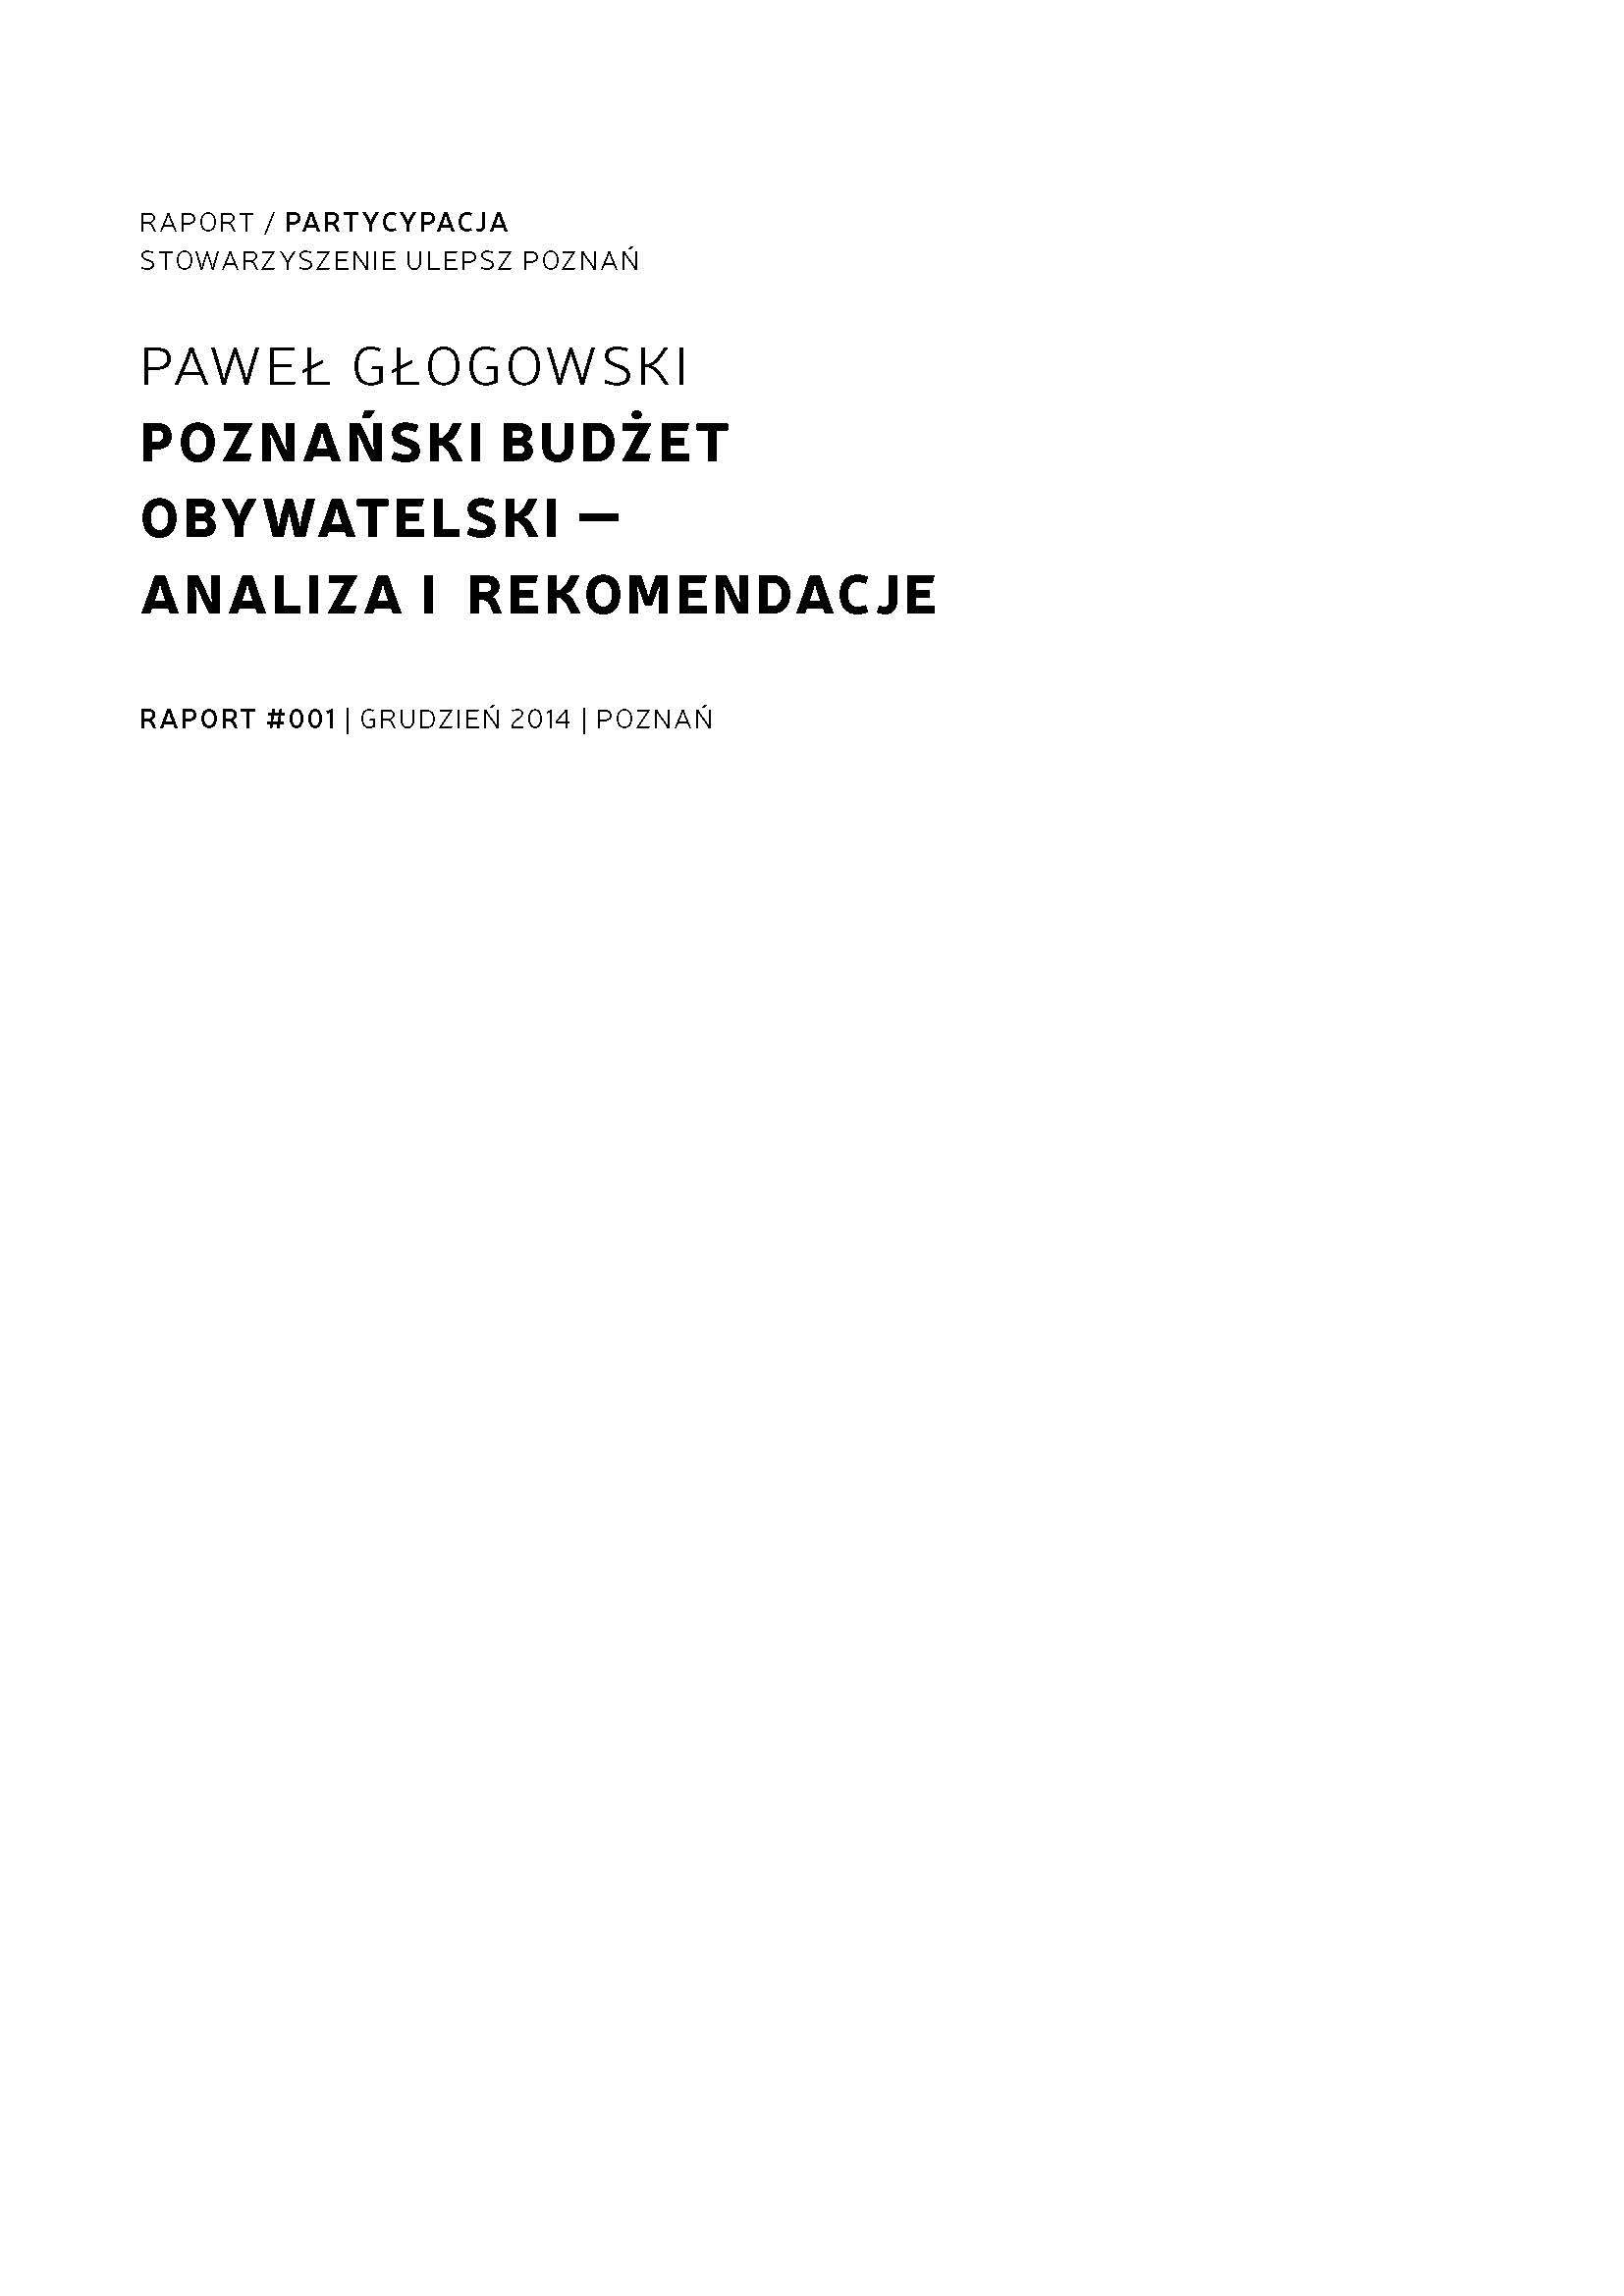 Poznan Participatory Budget - Analysis and Recommendations